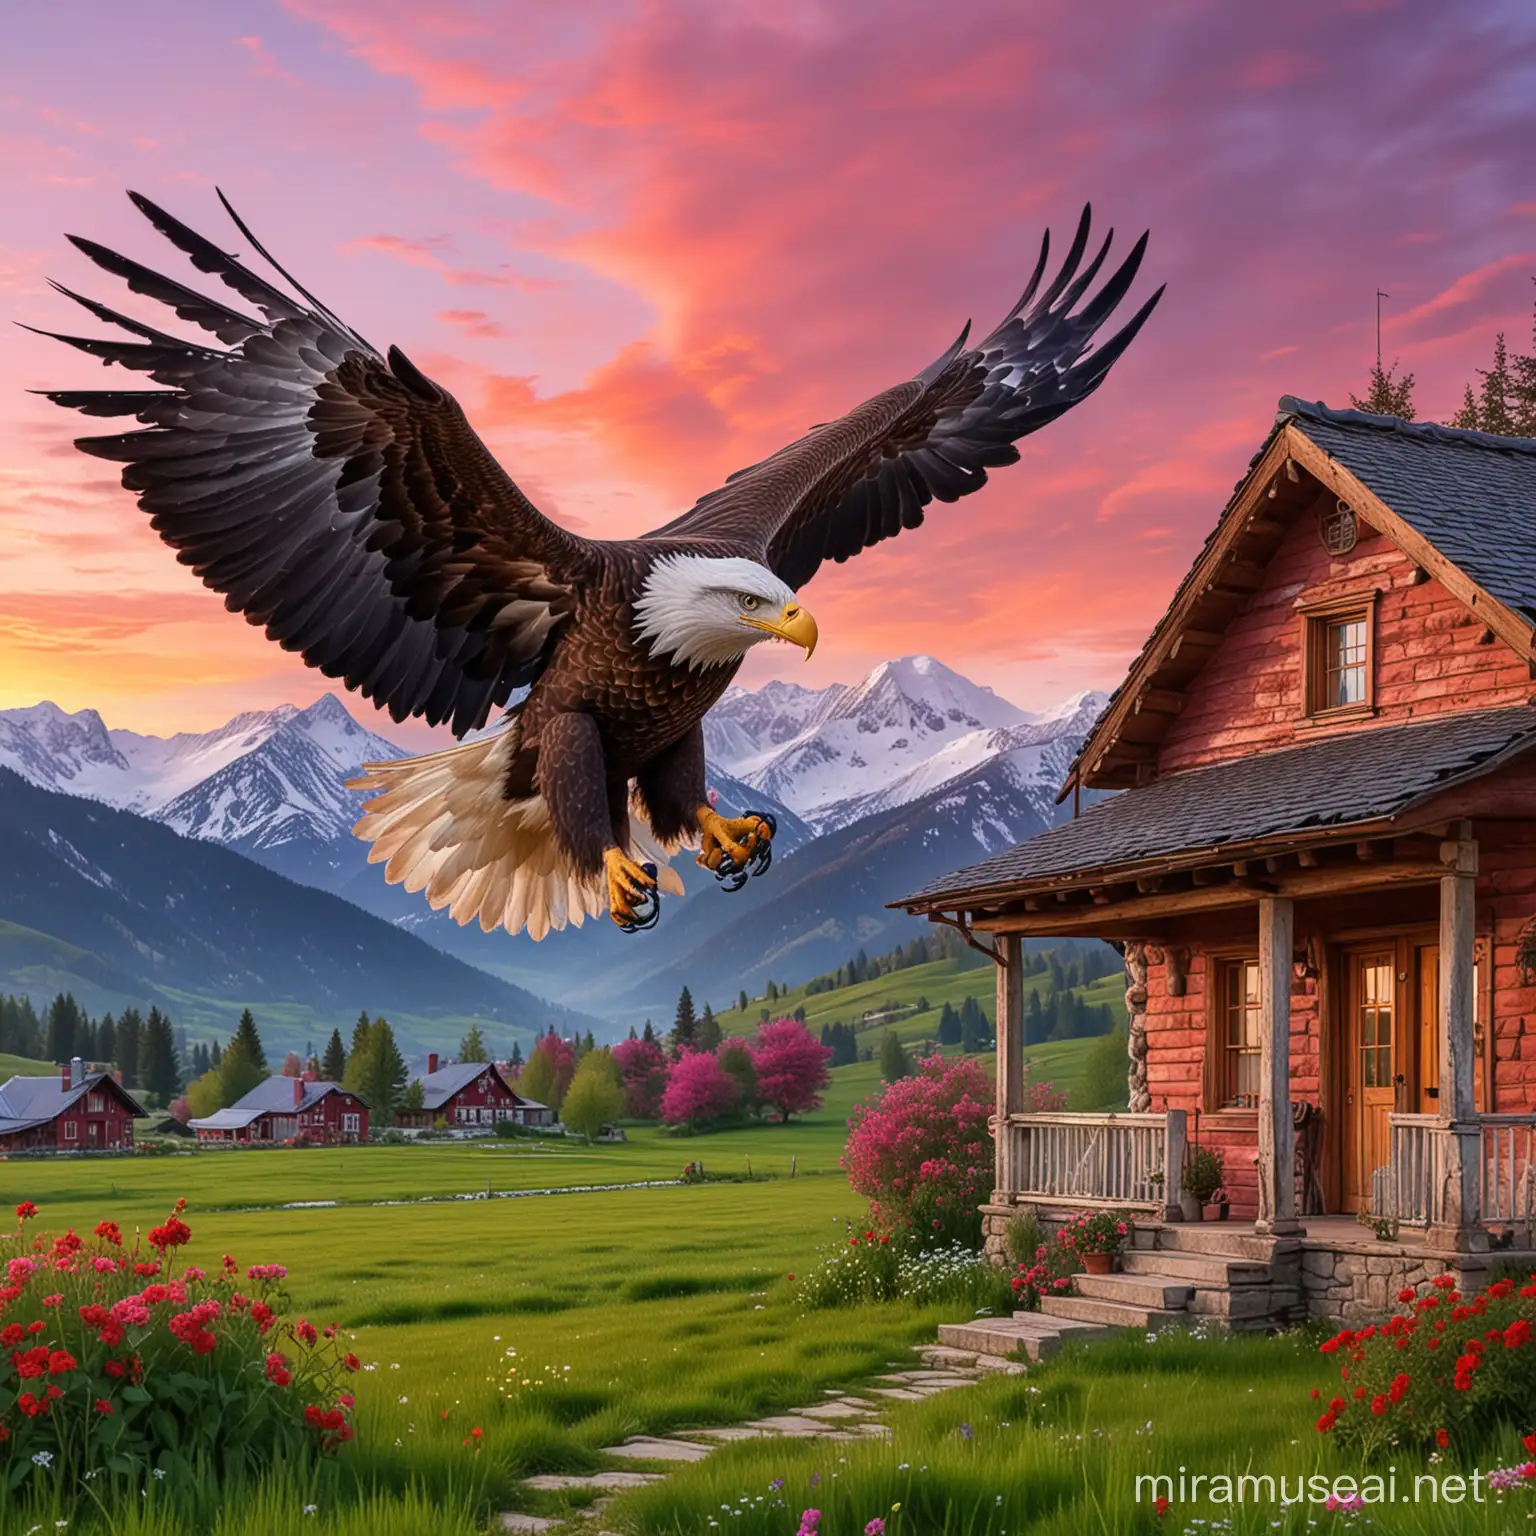 Majestic Eagle Soaring Over Snowy Mountains in Vivid Sunset Sky